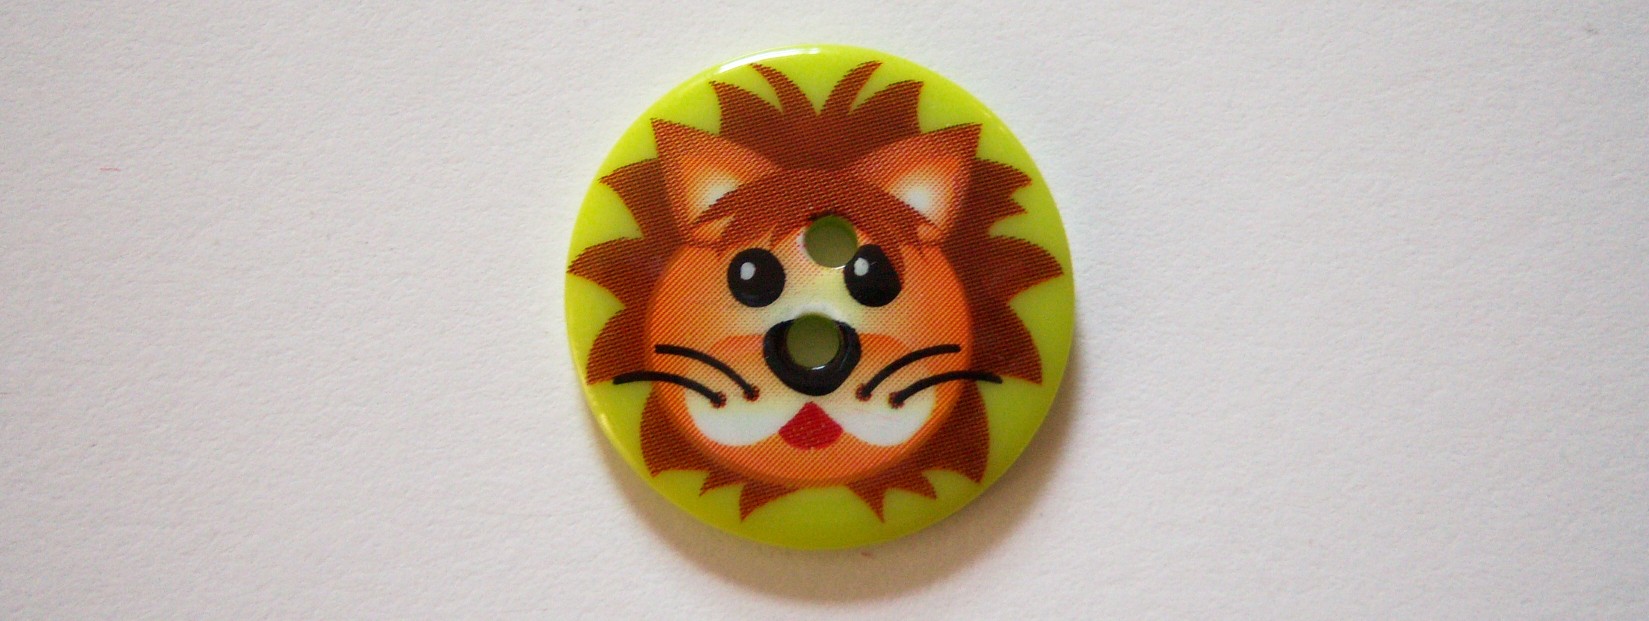 JHB Critter lion face 1" on shiny lime poly 2 hole button.